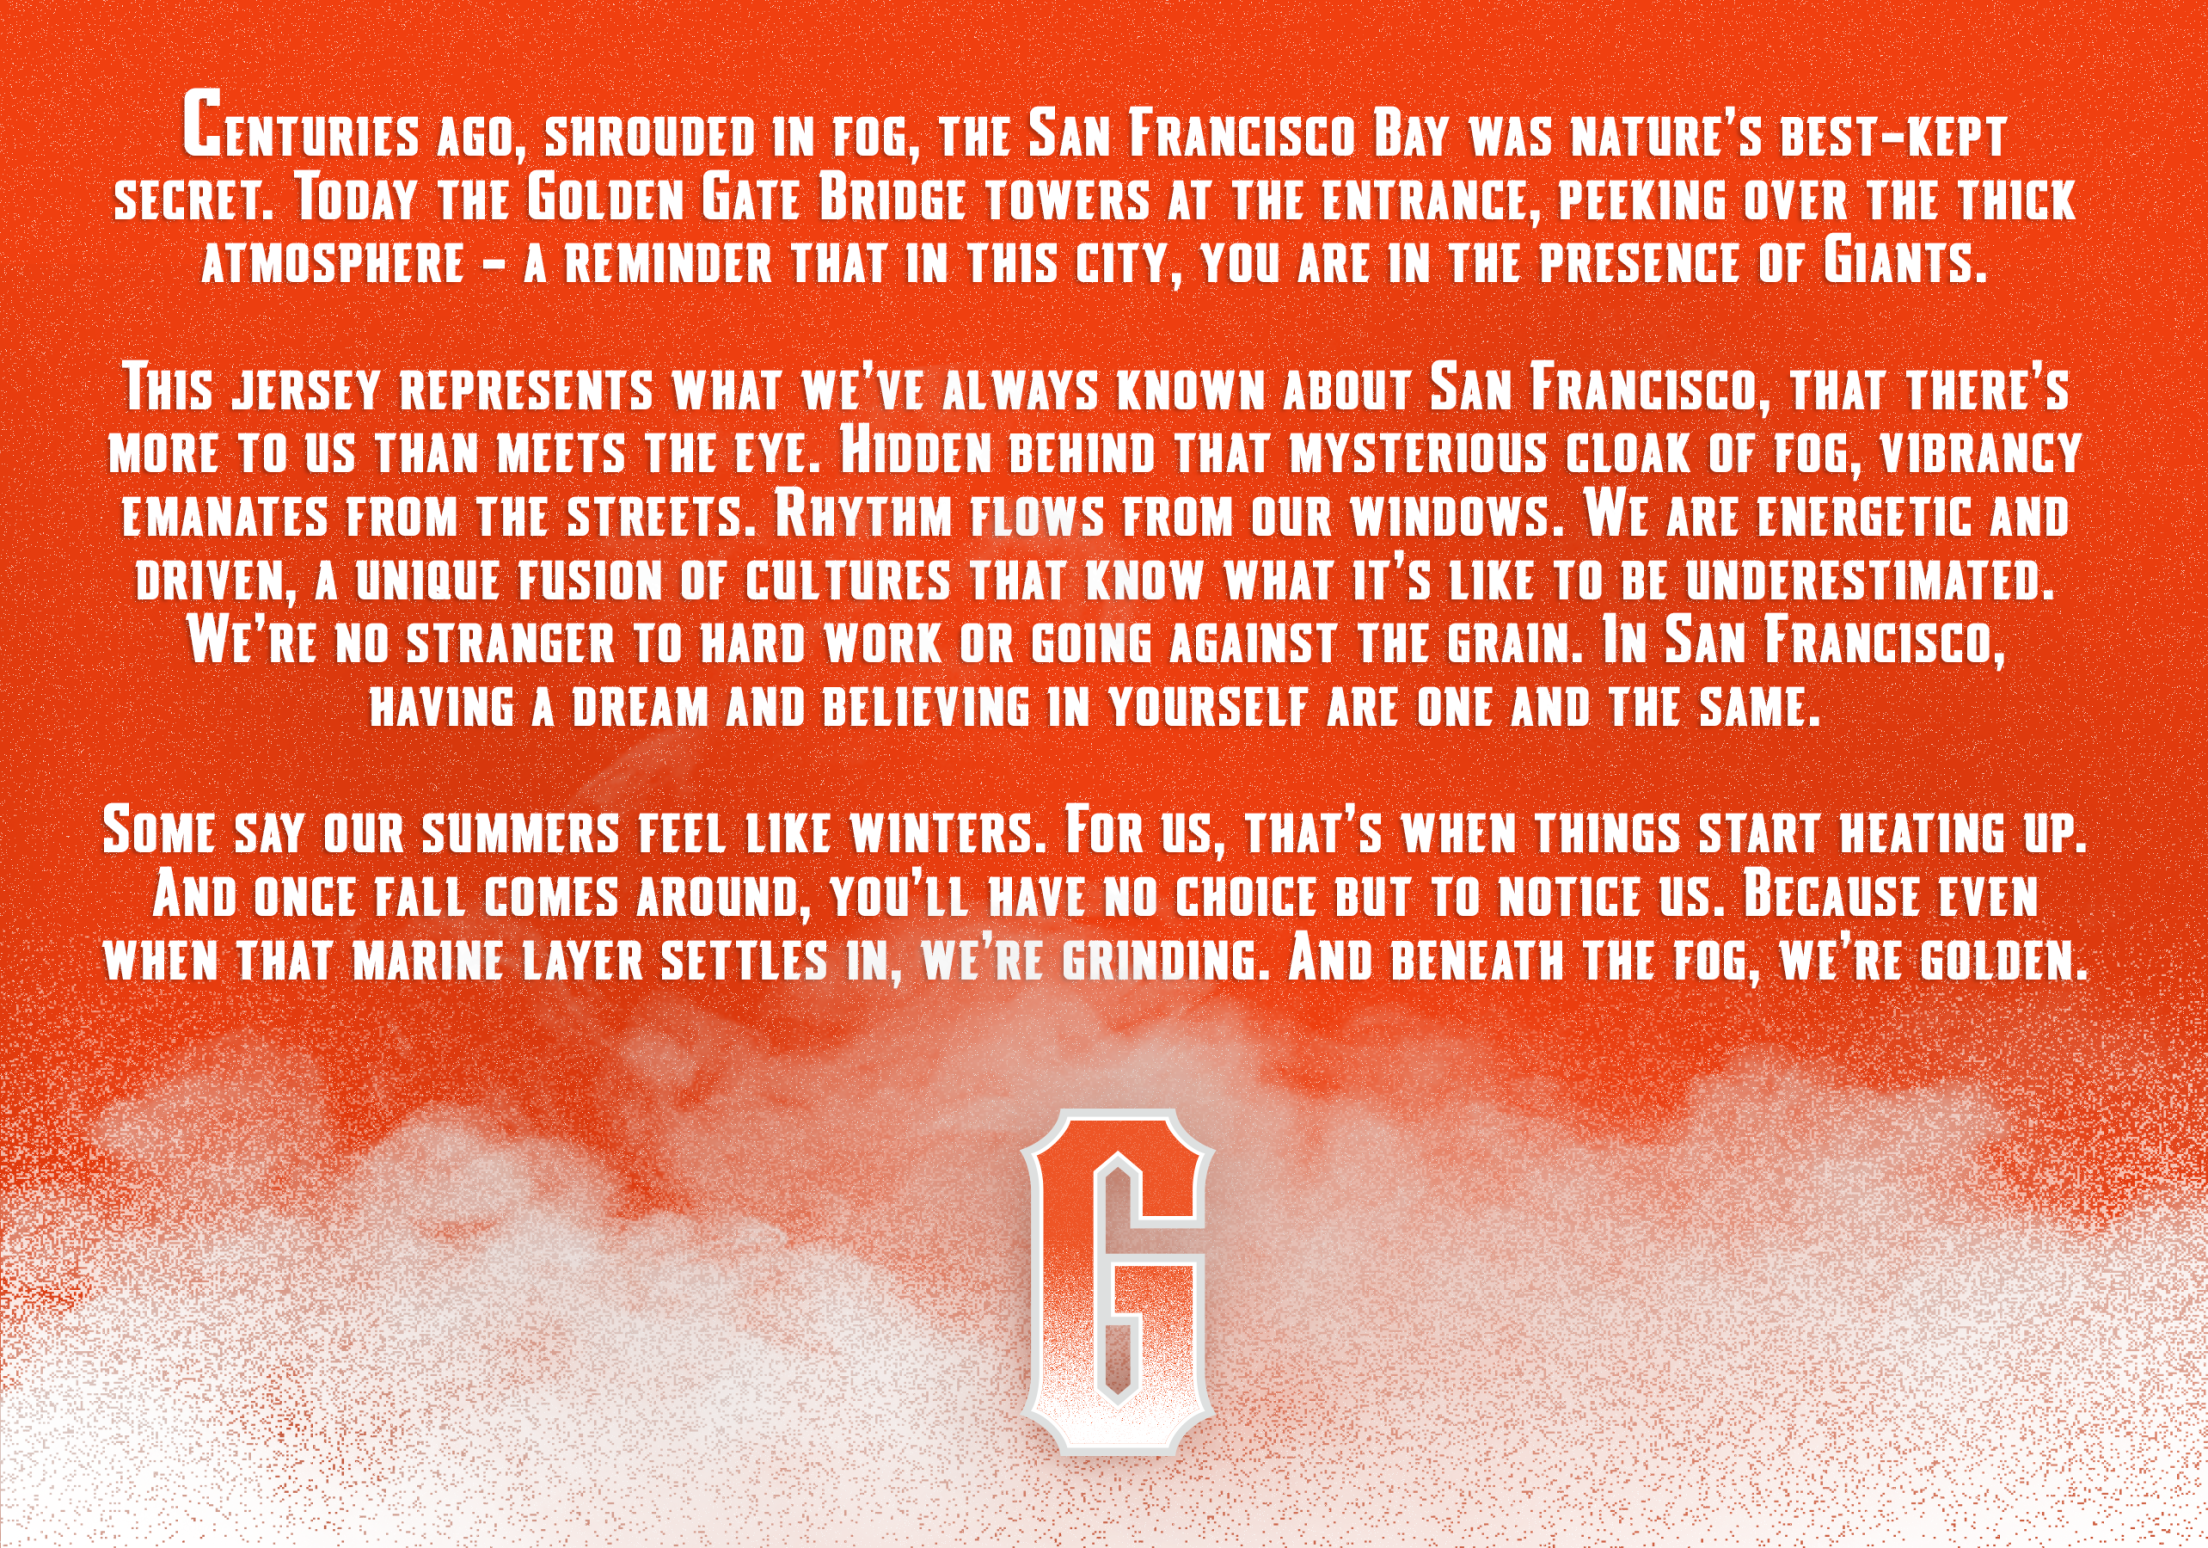 sf giants city connect